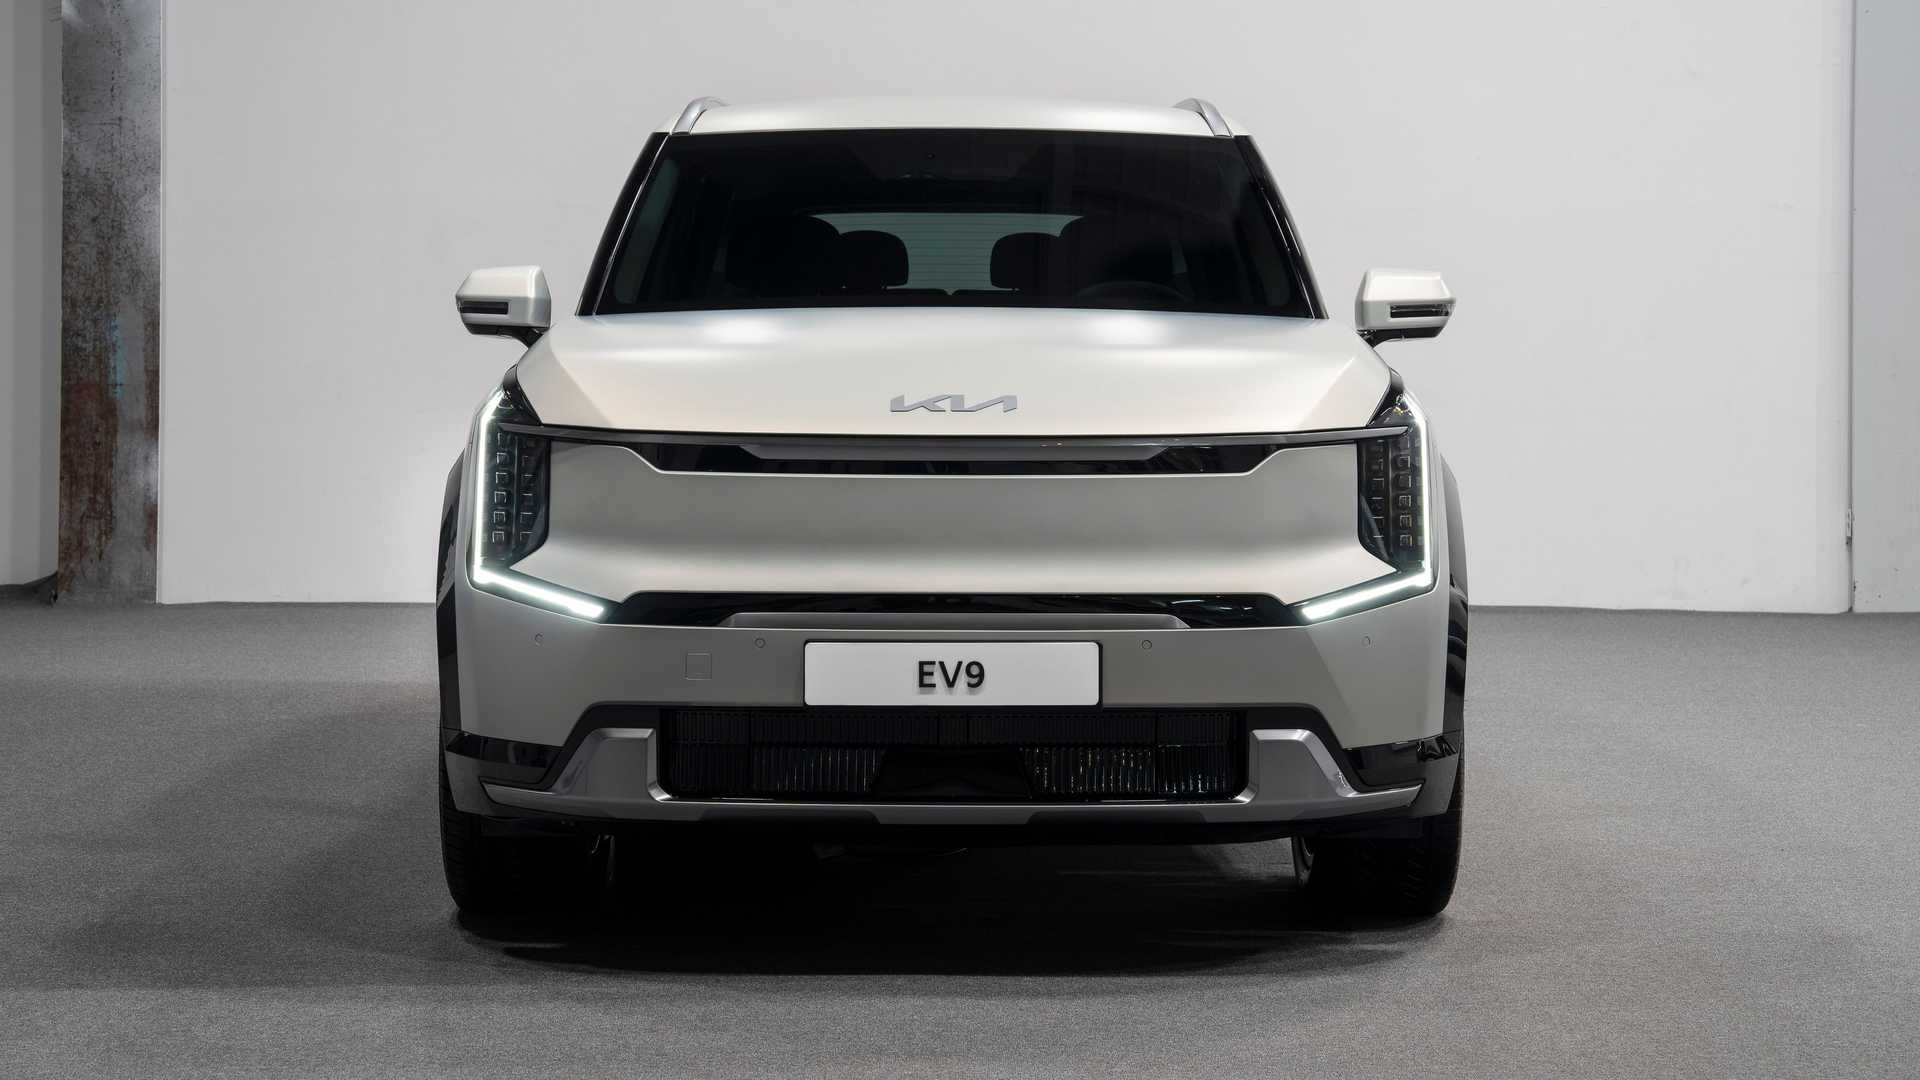 2024 kia ev9 revealed as electric telluride in first official images